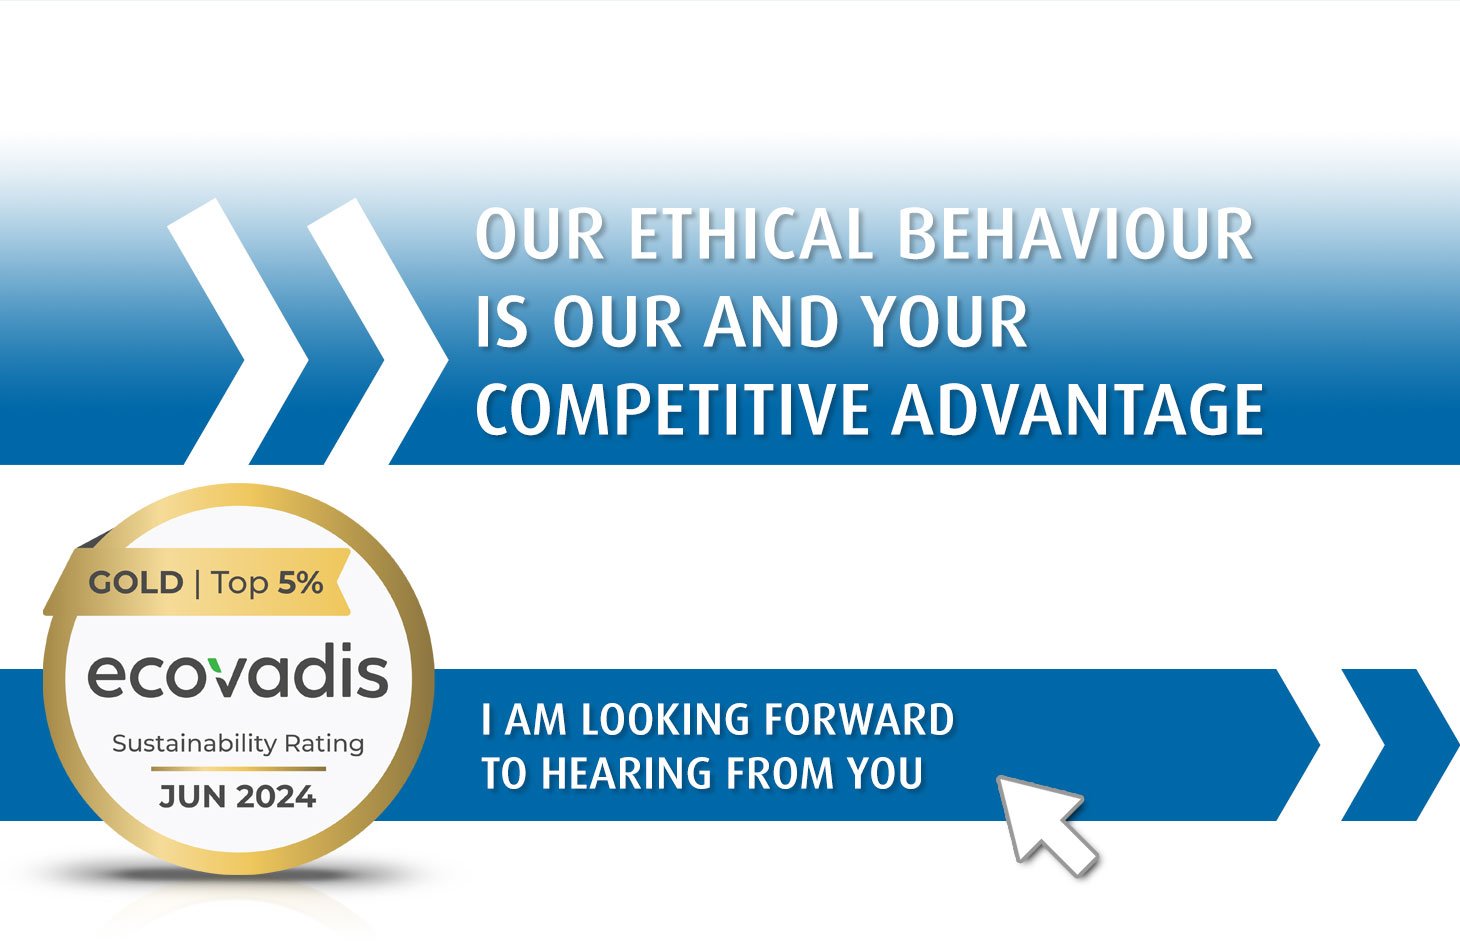 EcoVadis Gold Award - Sustainable and social corporate responsibility - Competitive advantage